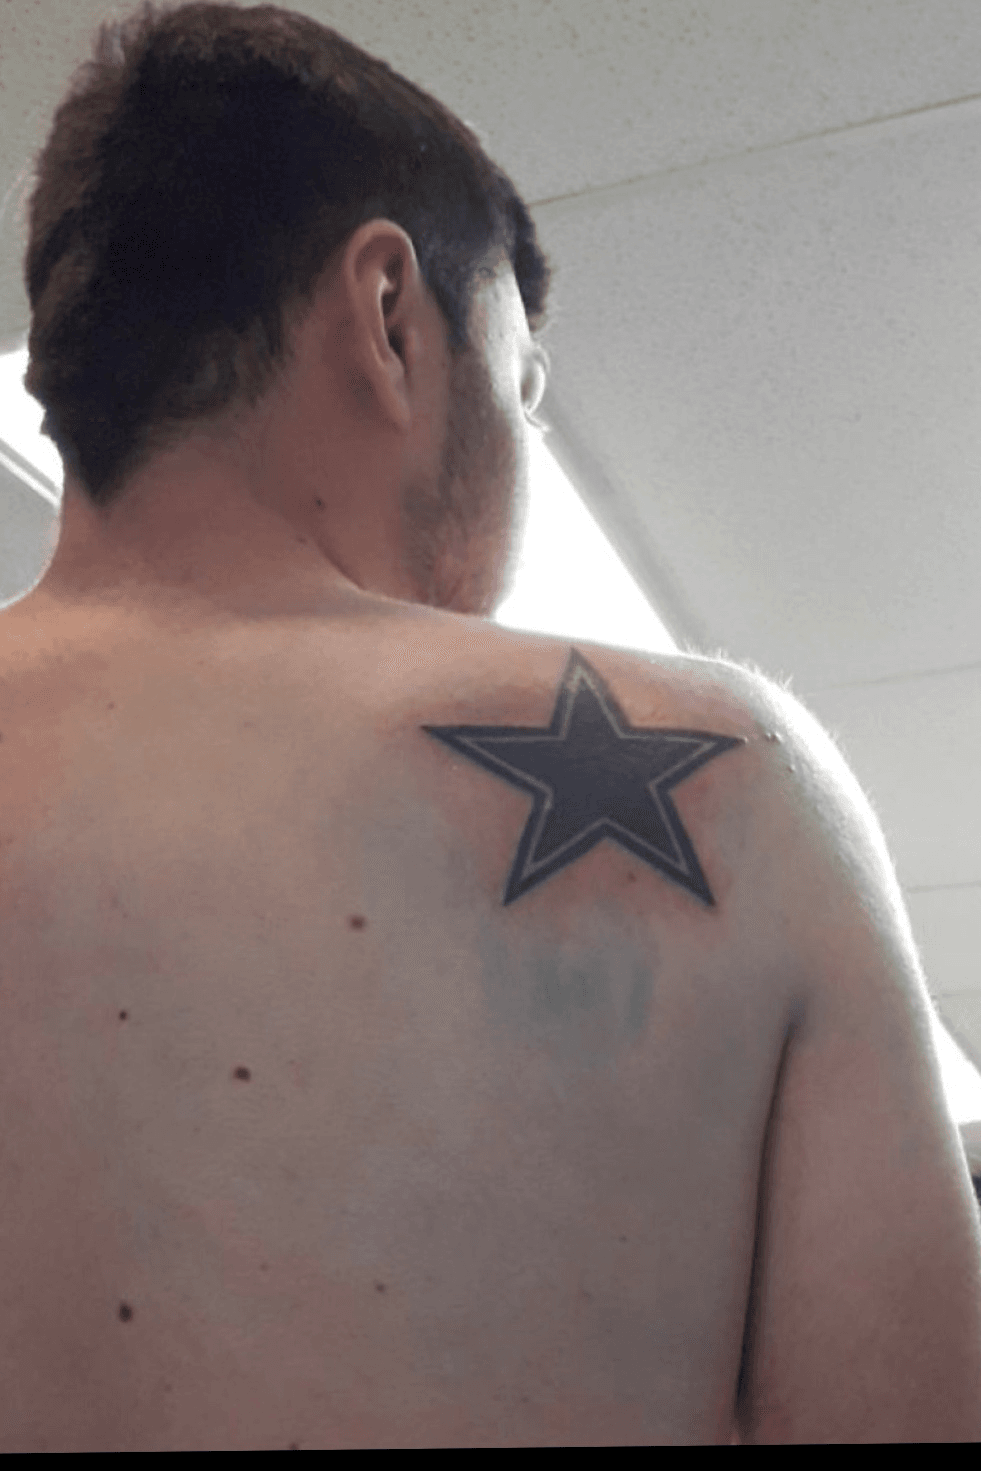 50 Dallas Cowboys Tattoos For Men  Manly NFL Ink Ideas  Cowboy tattoos  Texas tattoos Dallas tattoo